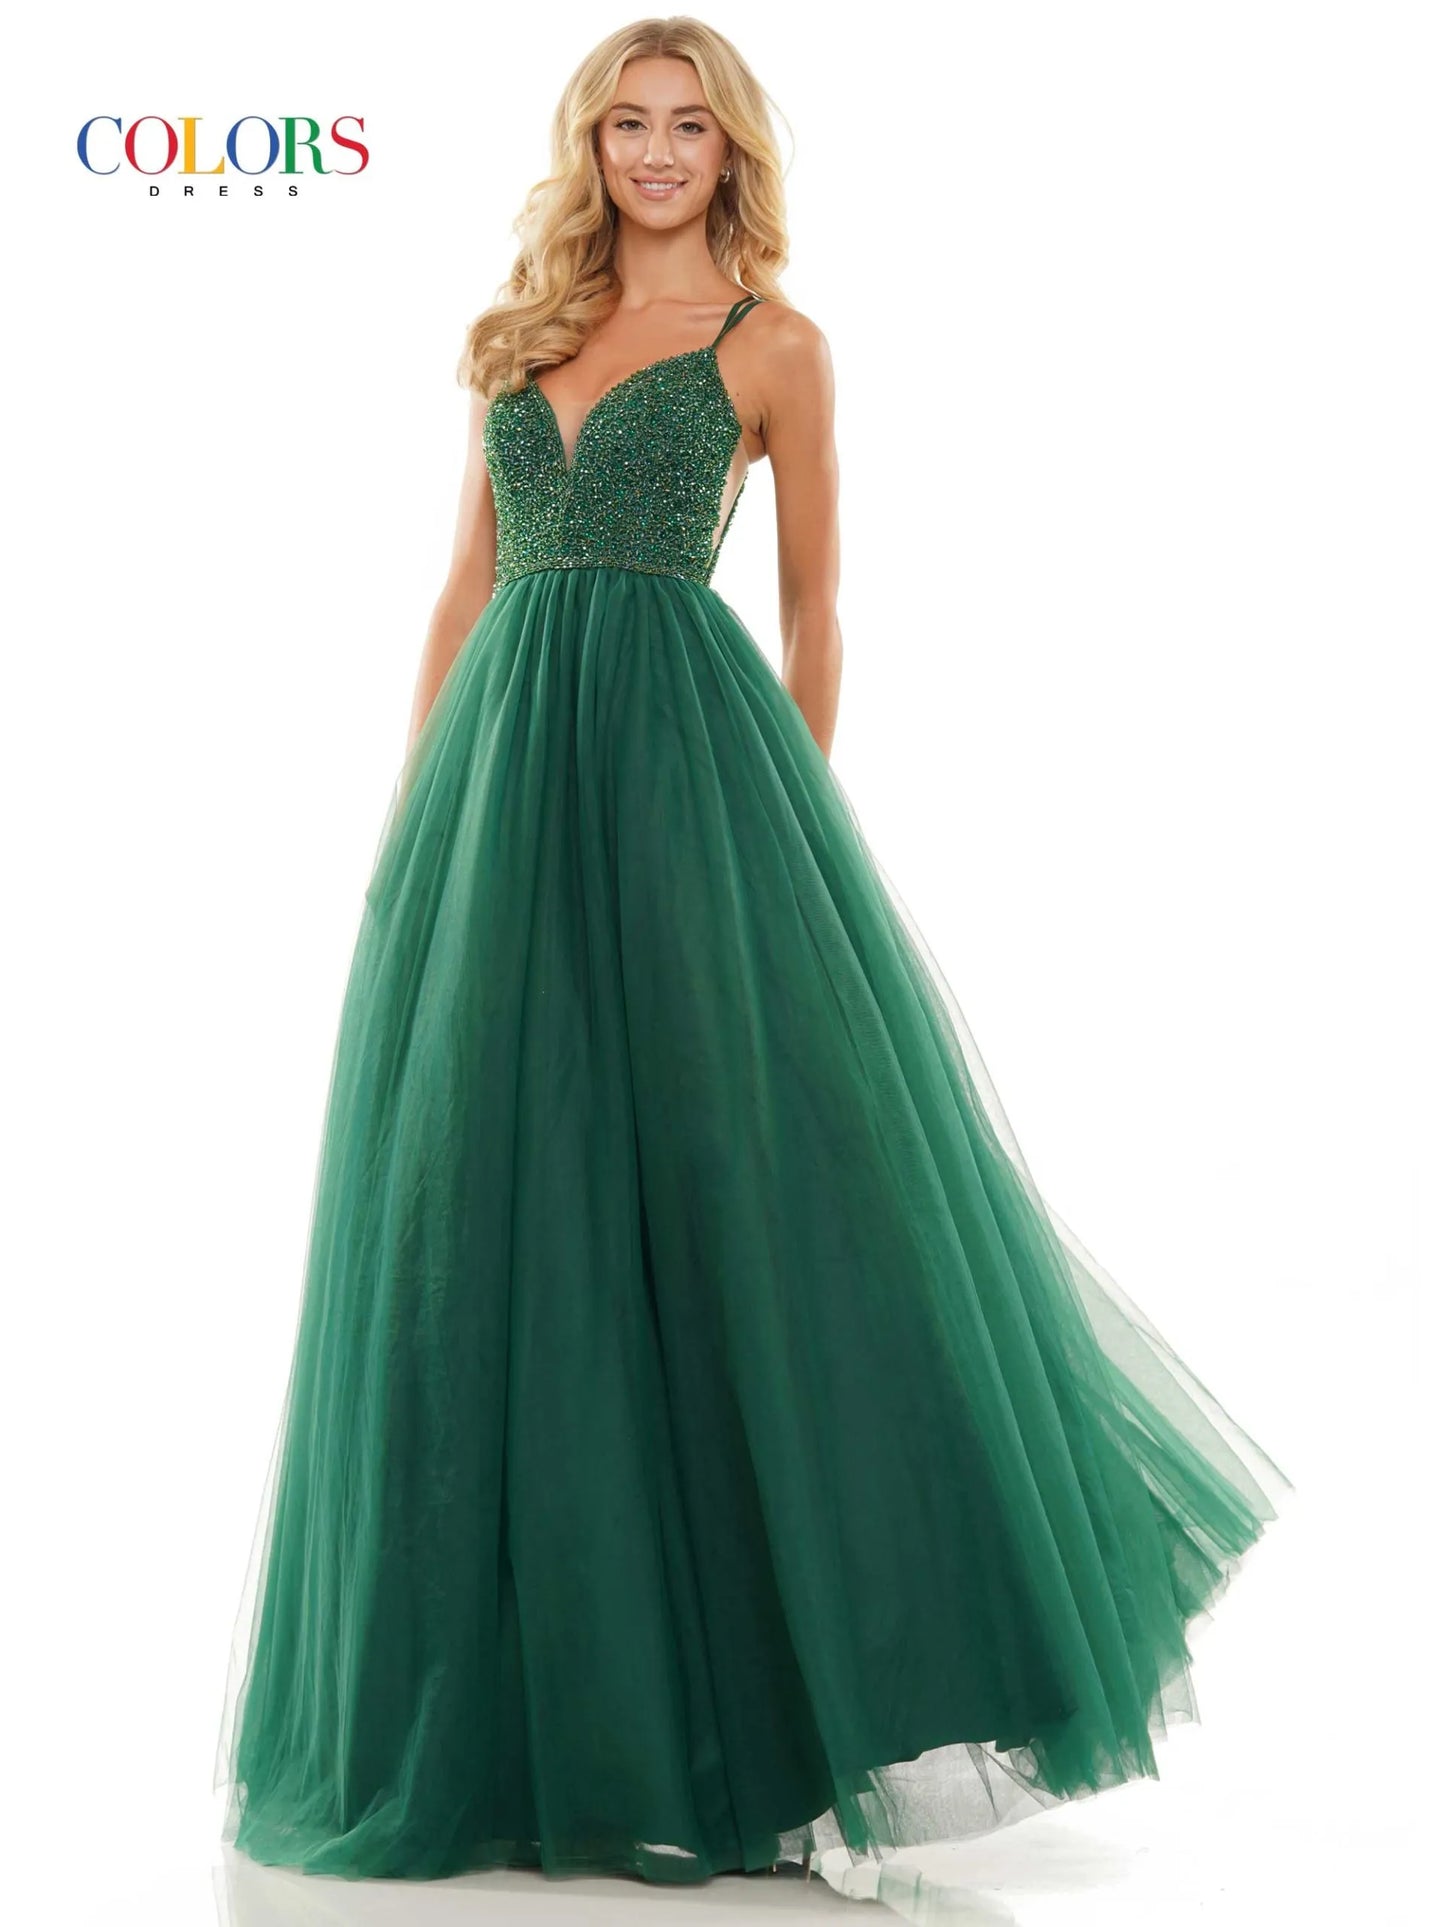 Make a statement in Colors 2382 Long Tulle Ballgown. Featuring a crystal V-neck, open corset back and formal ballgown skirt, this glamorous gown is the perfect choice for prom or any special night. 47" tulle gown with beaded bodice, sheer side panels, plunged V neck and lace up back detail  Sizes: 0-20   Colors: Black, Red, Emerald, Off White, Royal Purple